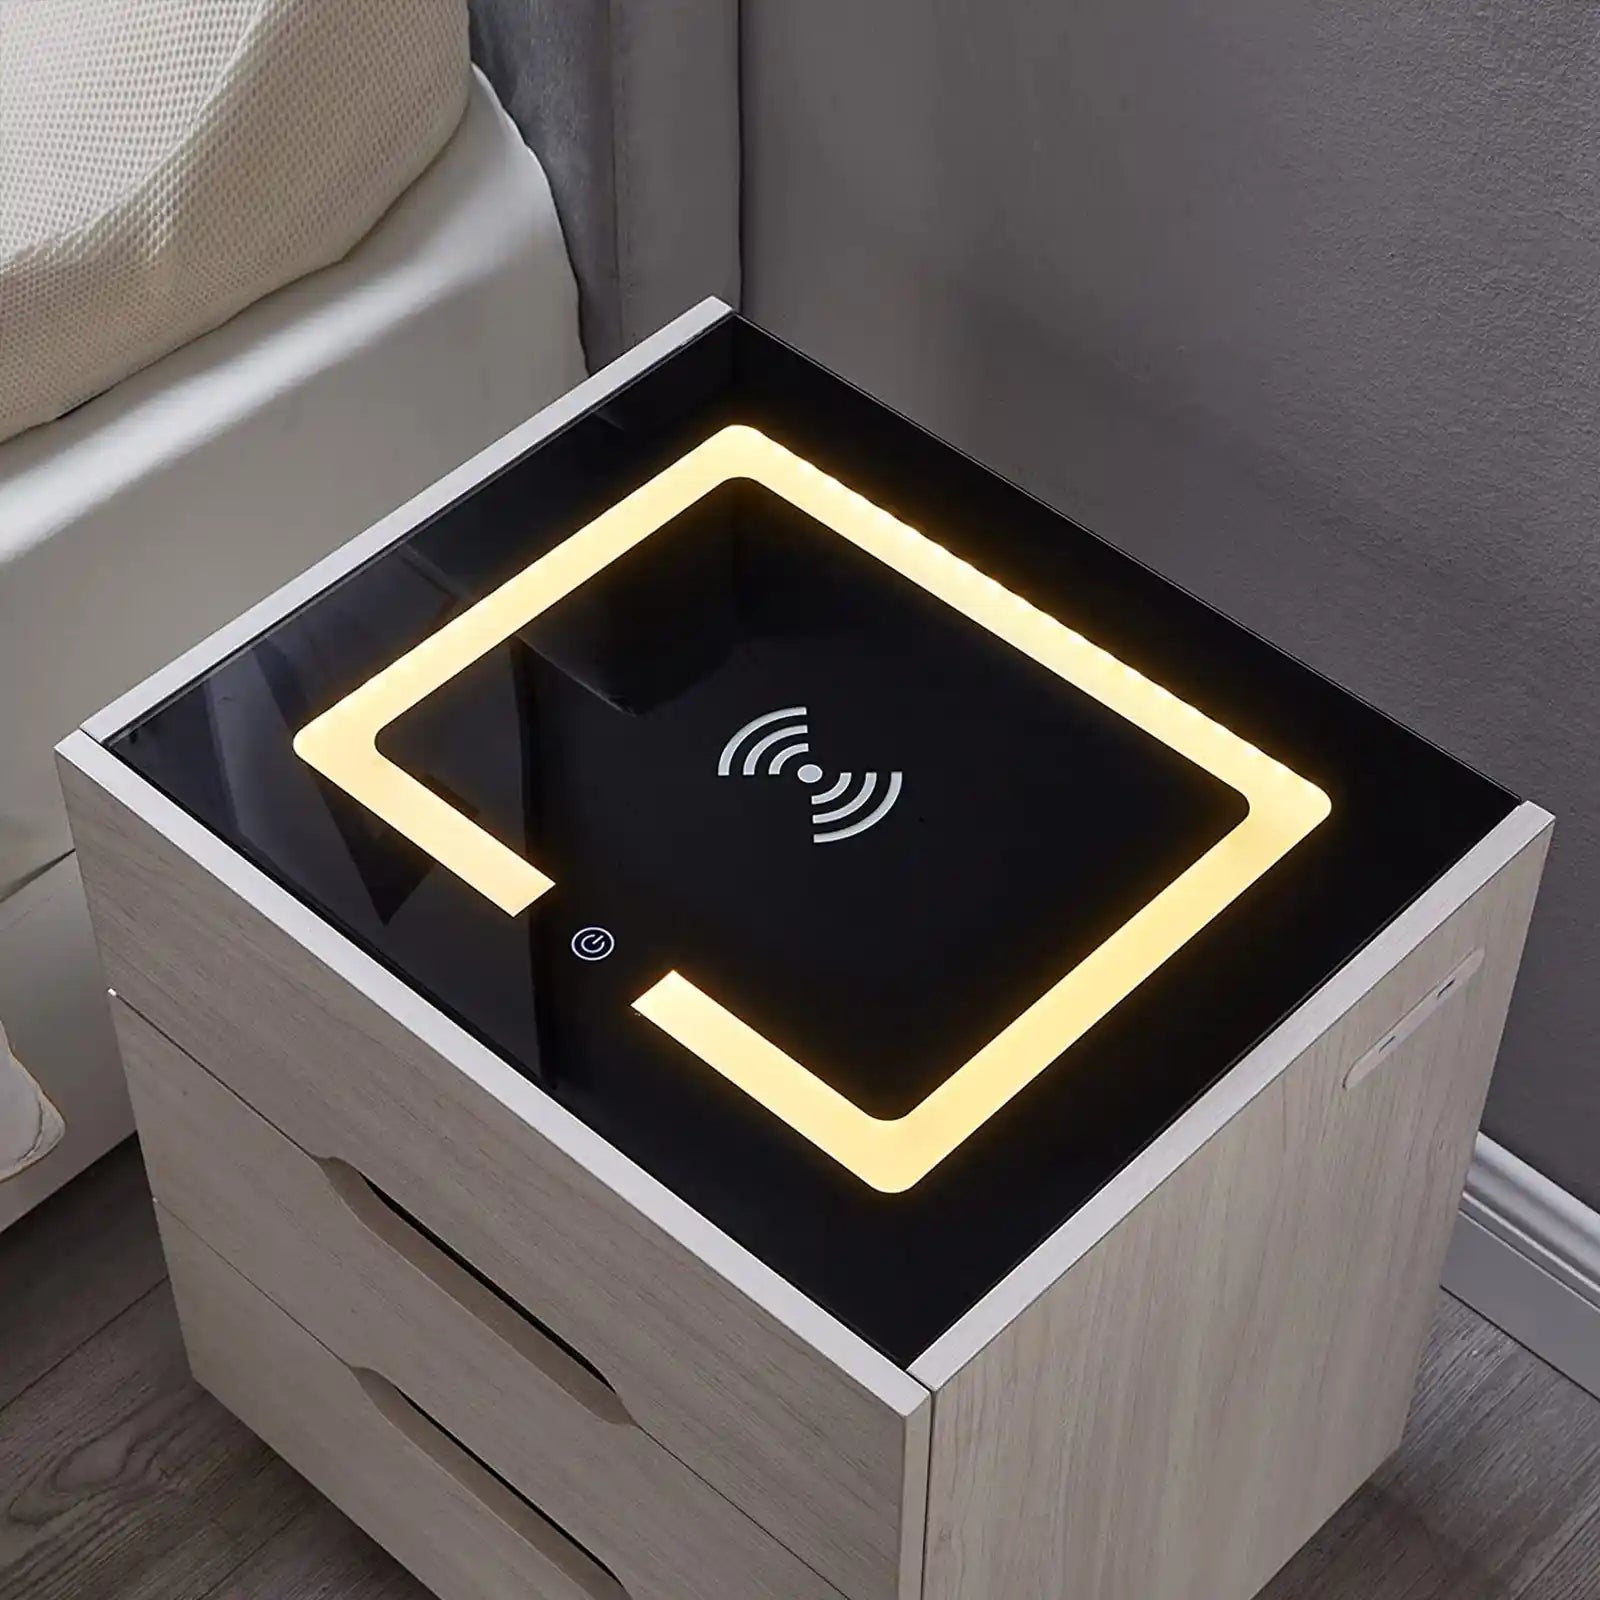 Nightstands Wireless Charging Station and LED Lights, Modern End Side Table with 3 Drawer Nightstand Storage Cabinet for Bedroom